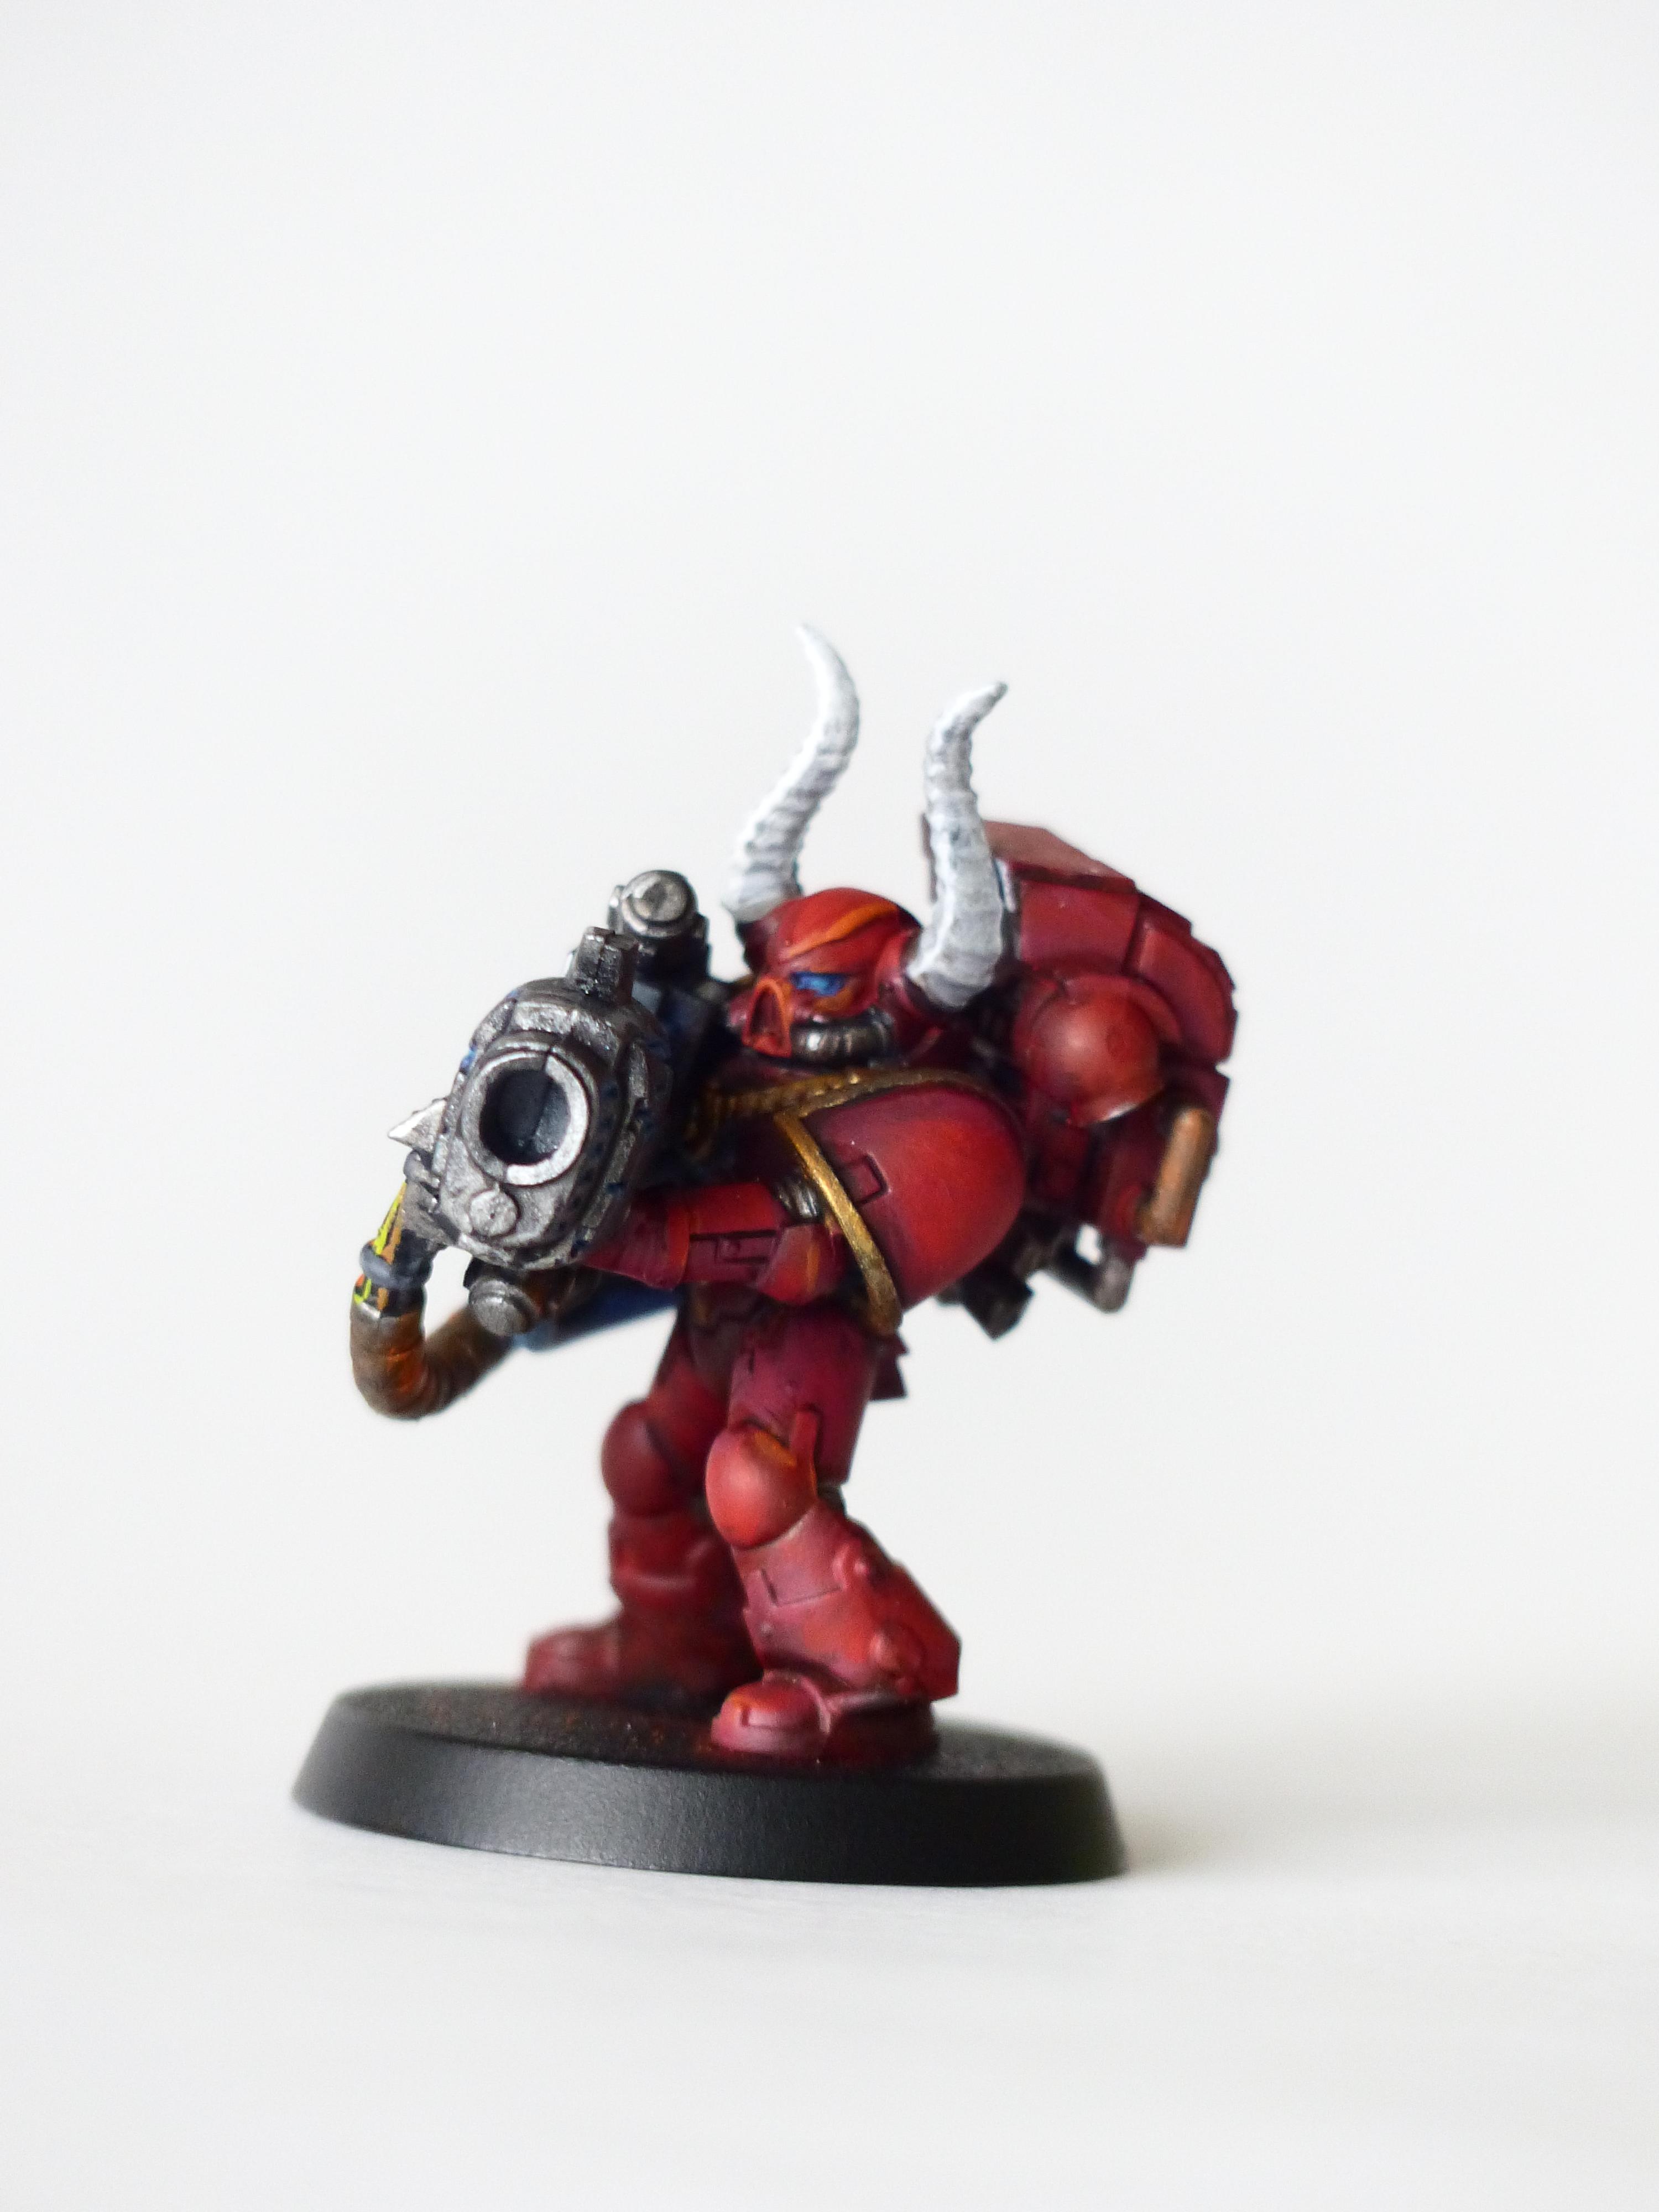 Chaos, Chaos Space Marines, Crimson Slaughter, Havocs, Heavy Weapon, Lascannon, Missile Launcher, Plasma Cannon, Space Marines